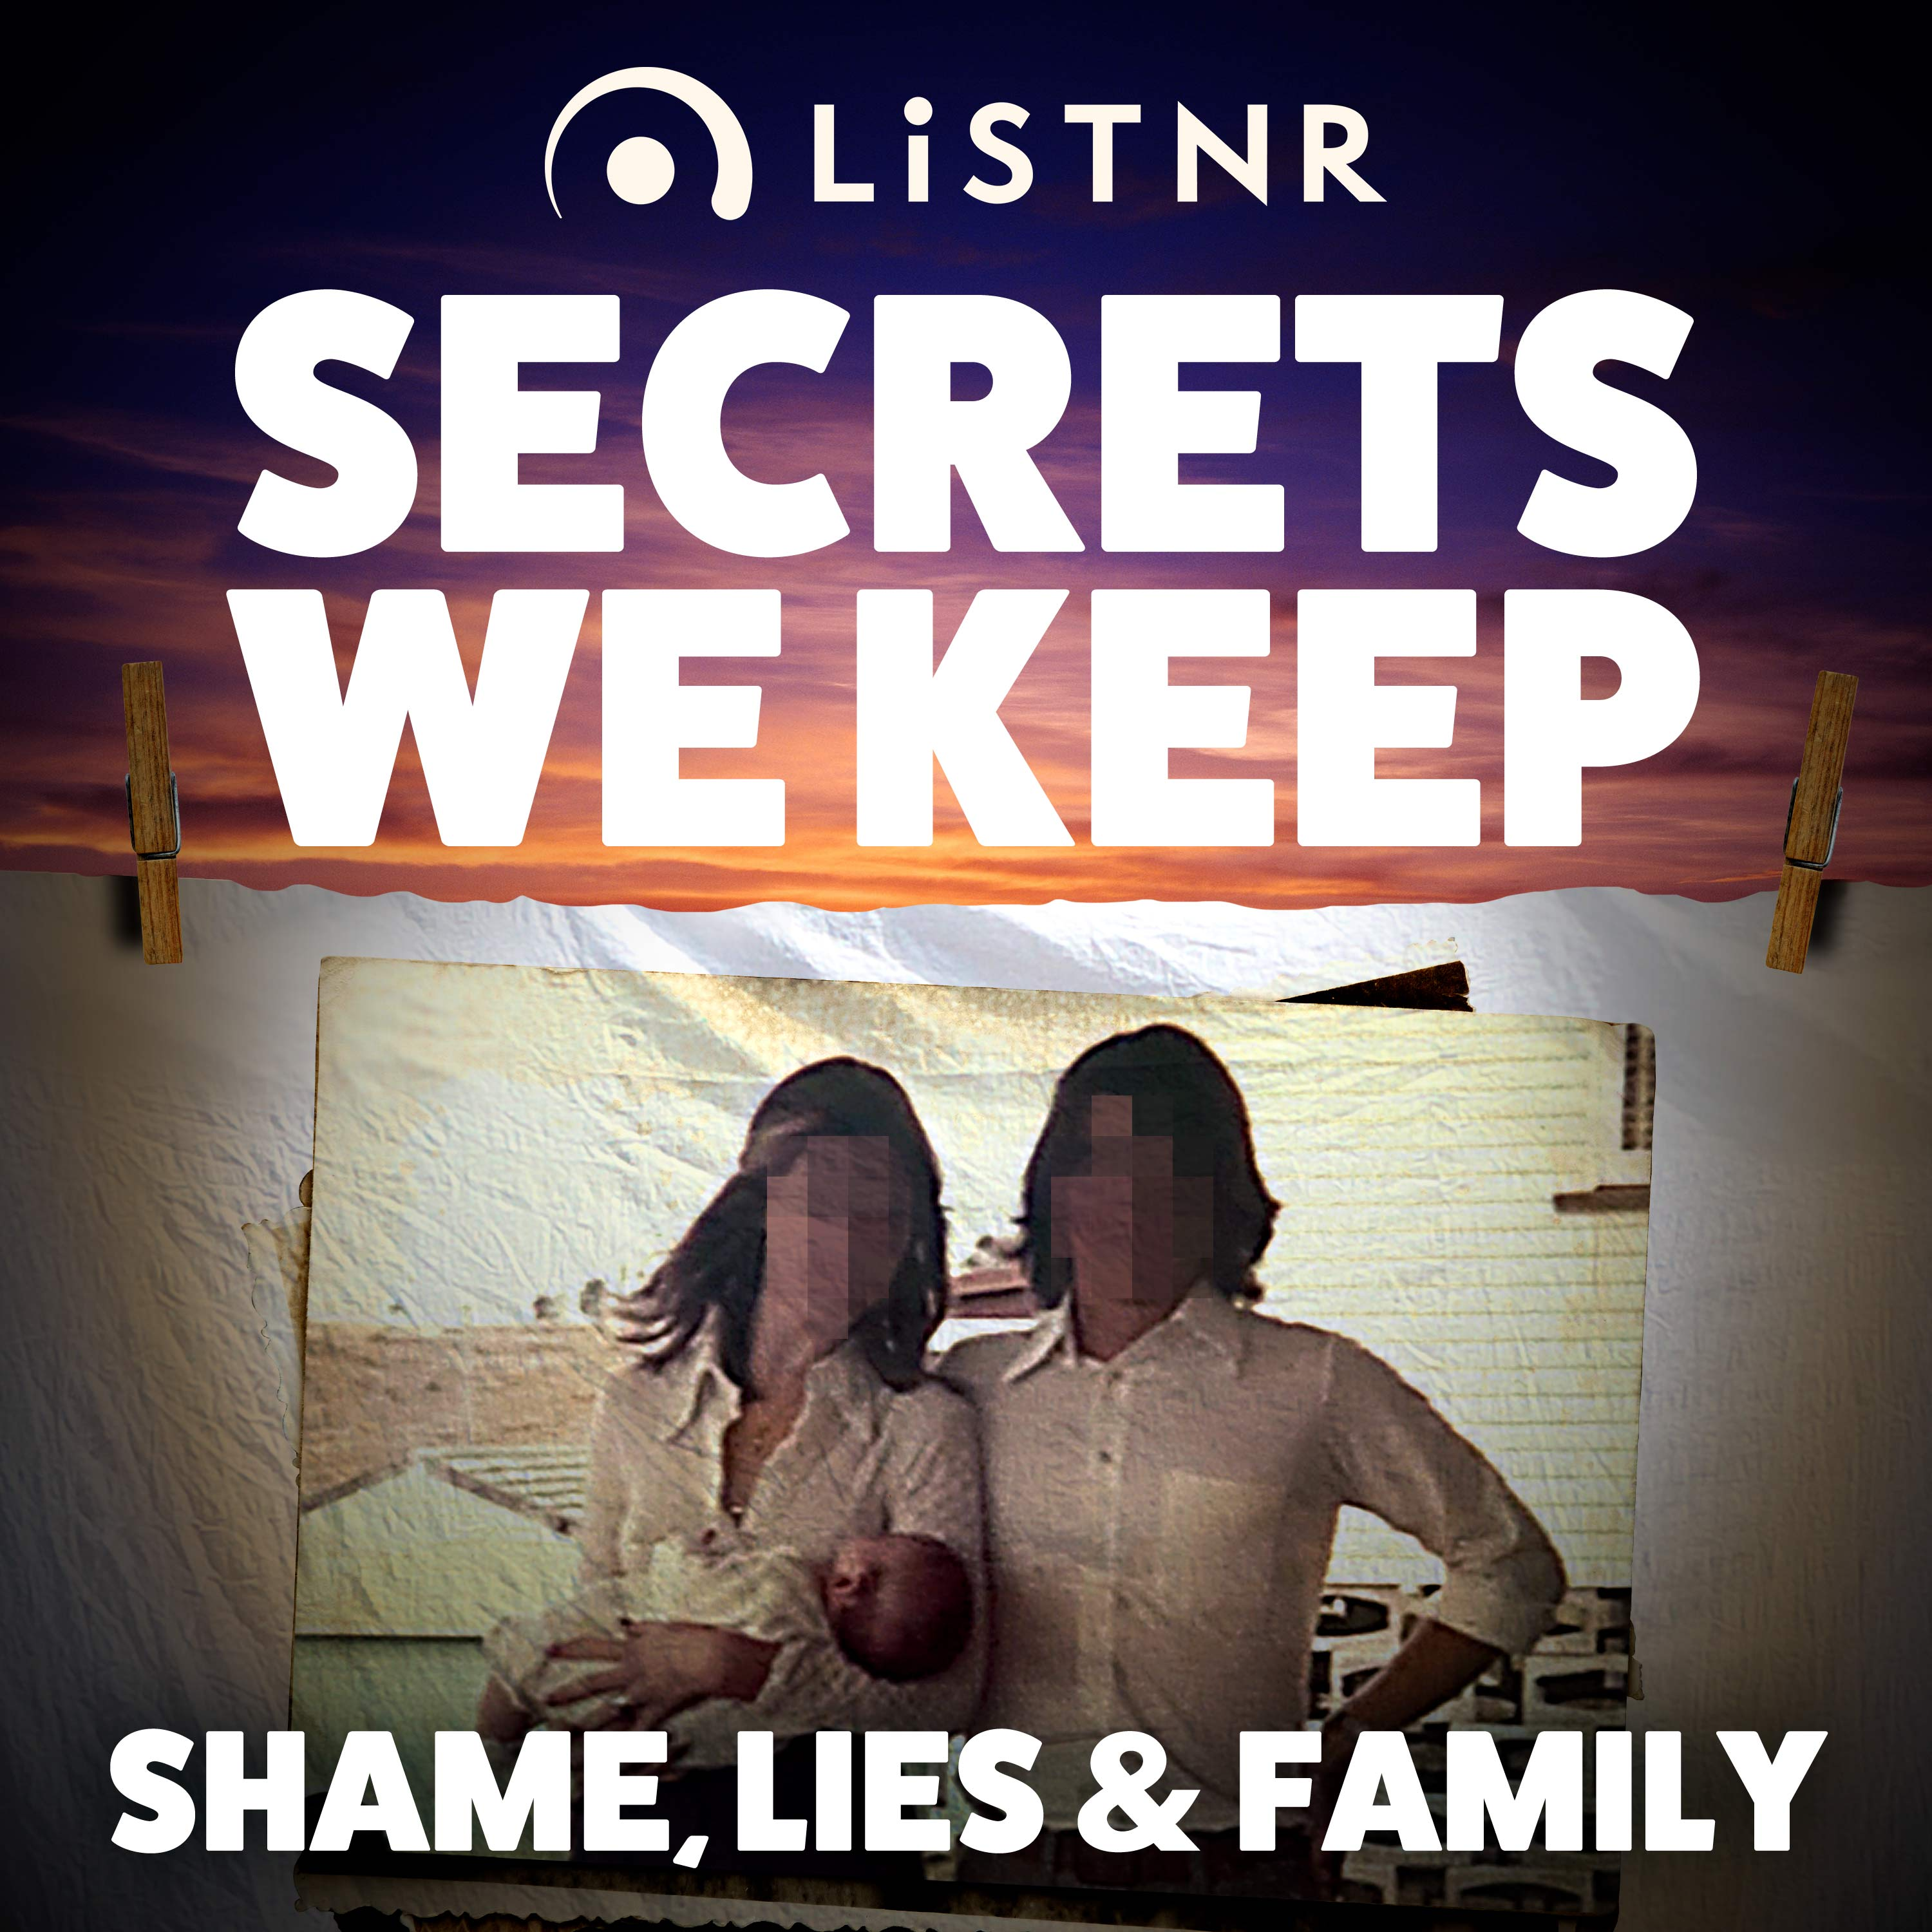 Shame, Lies & Family - In the child’s best interest